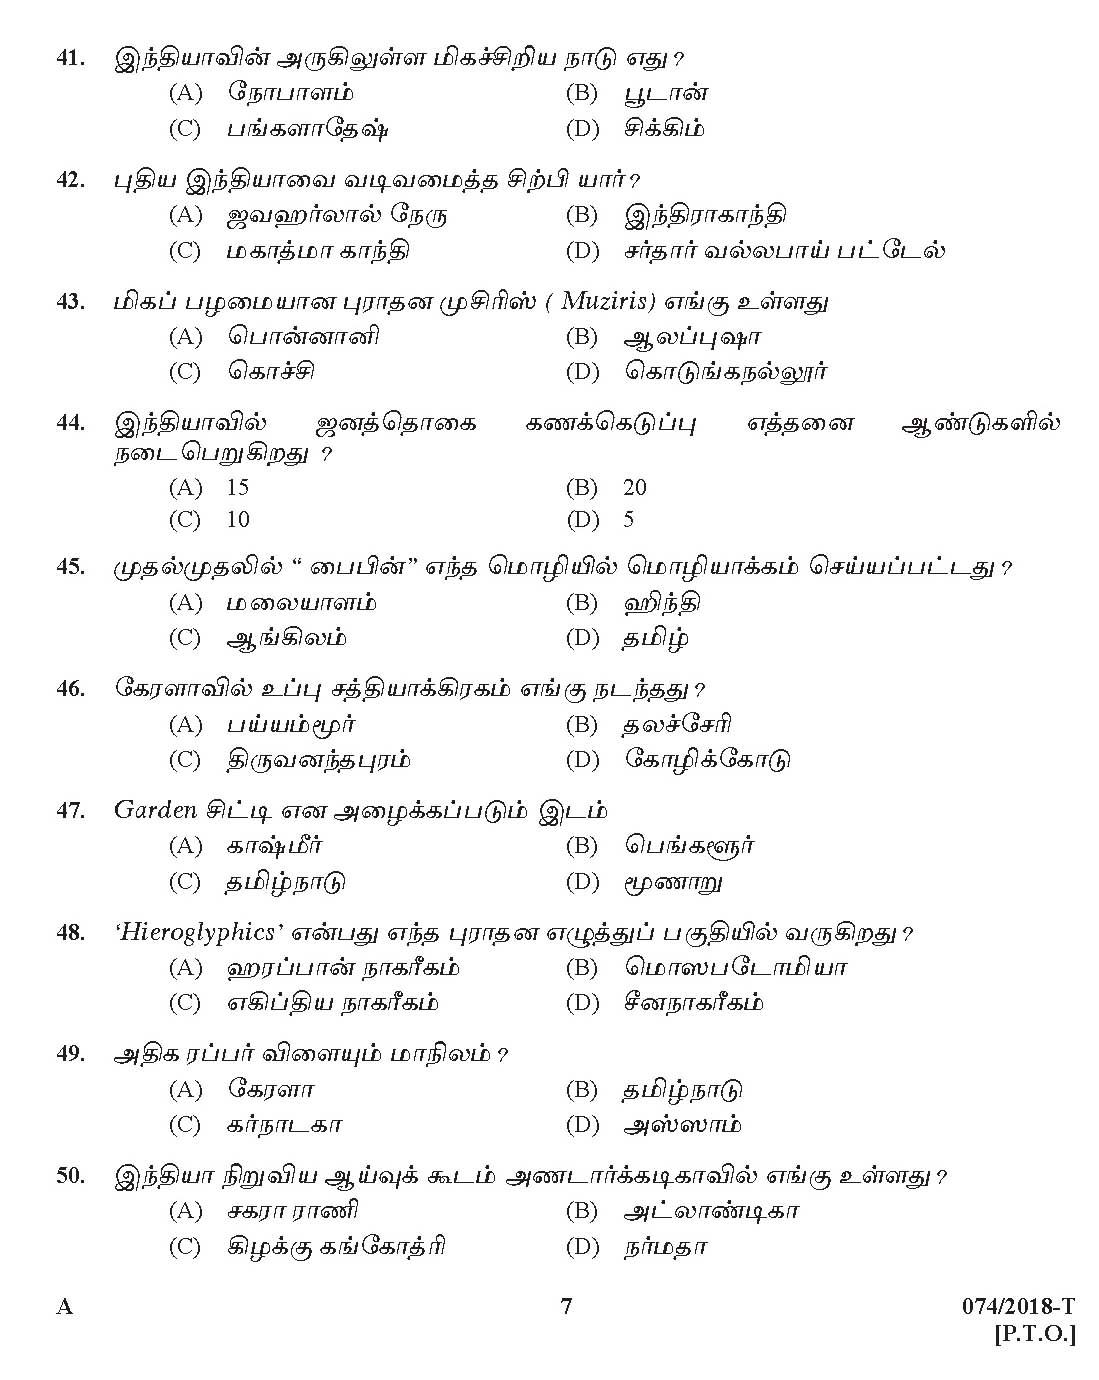 Kerala PSC Police Constable Driver Exam 2018 Question Paper Code 0742018 T 6